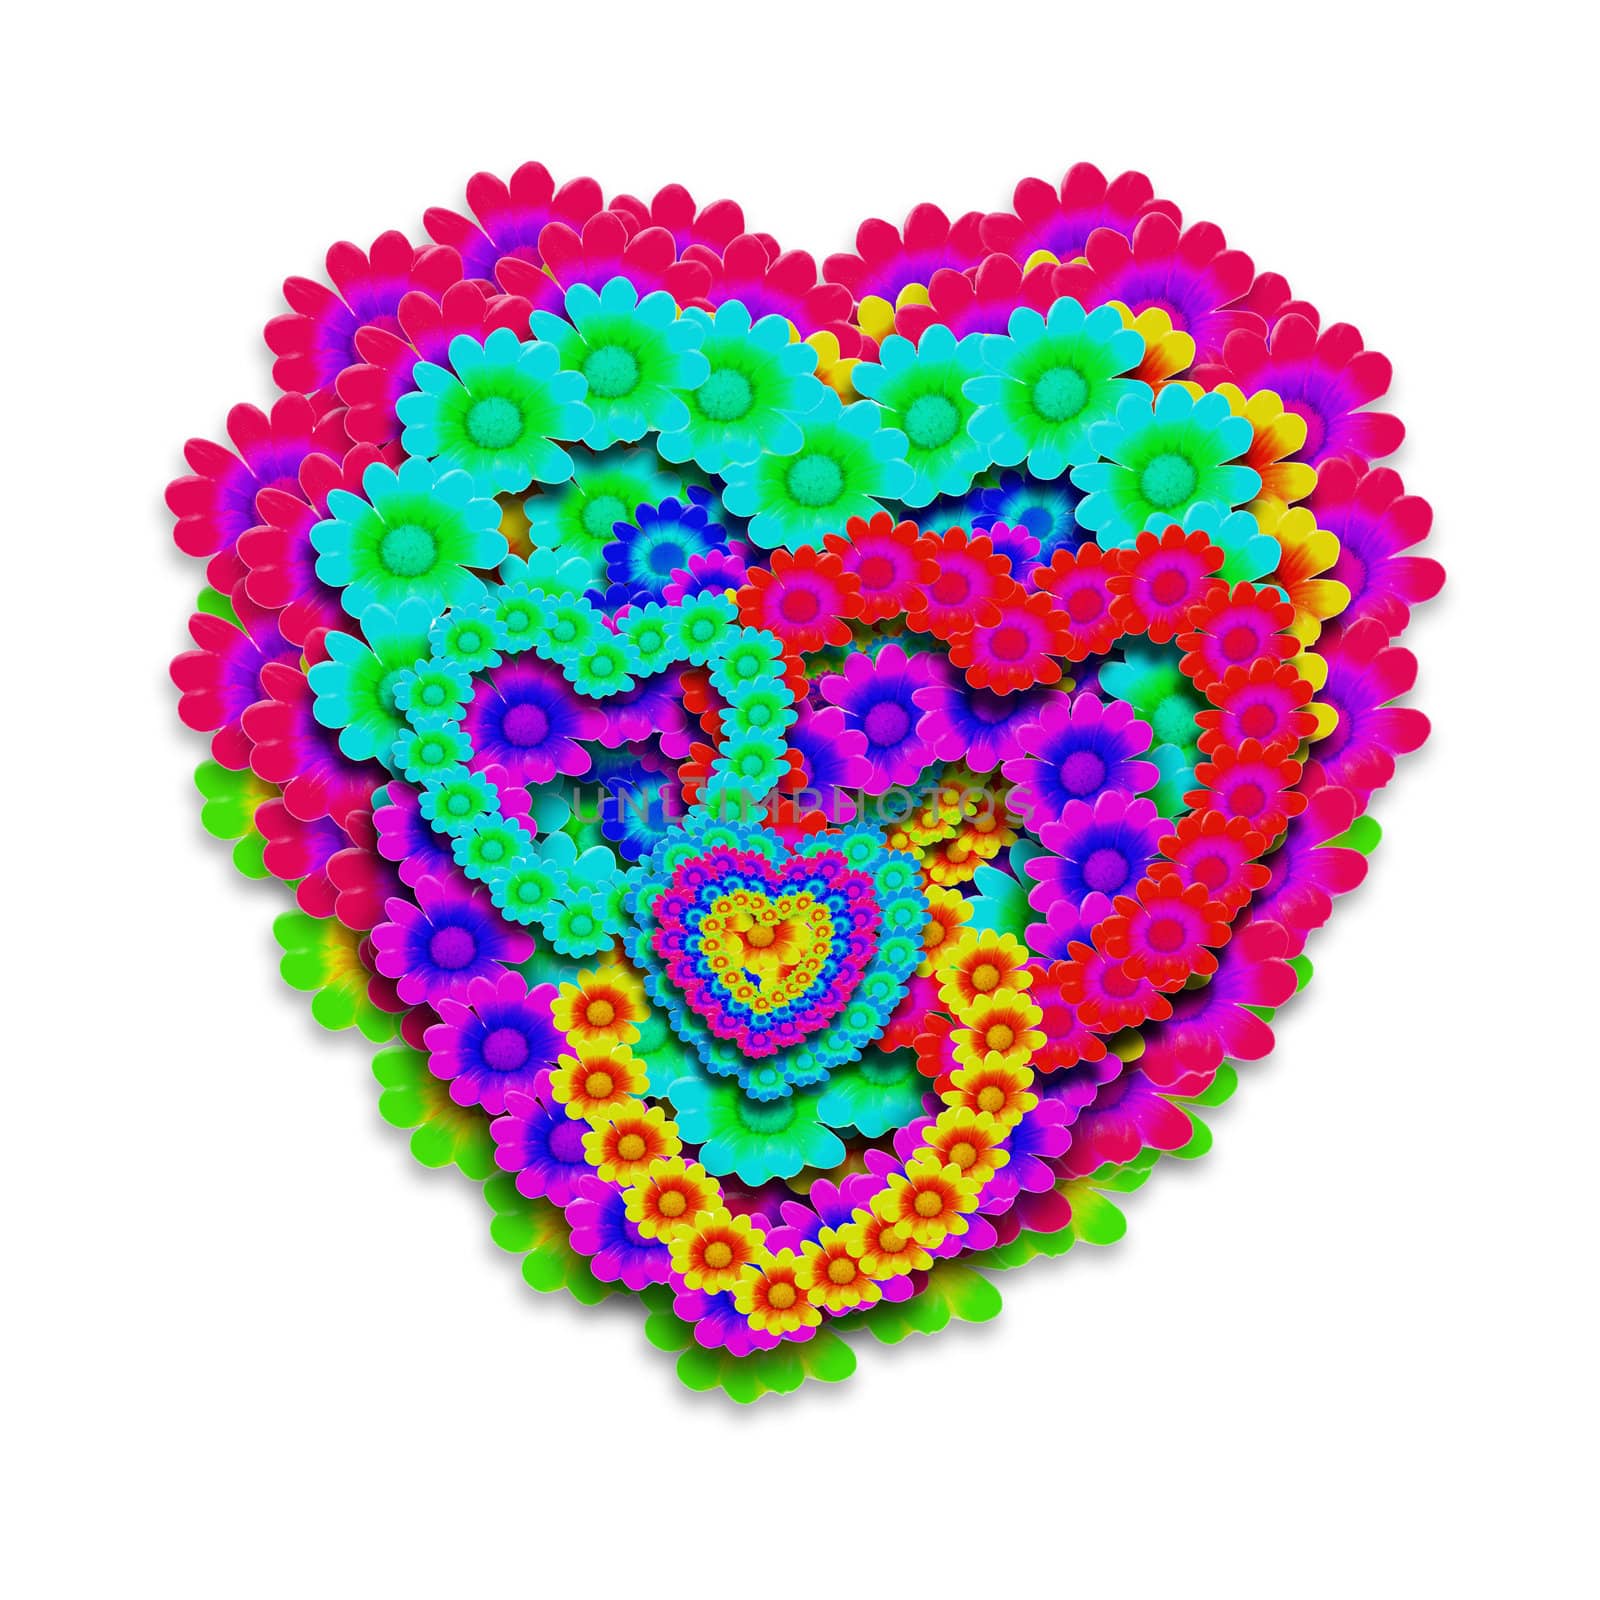 heart of flowers in bright colors isolated